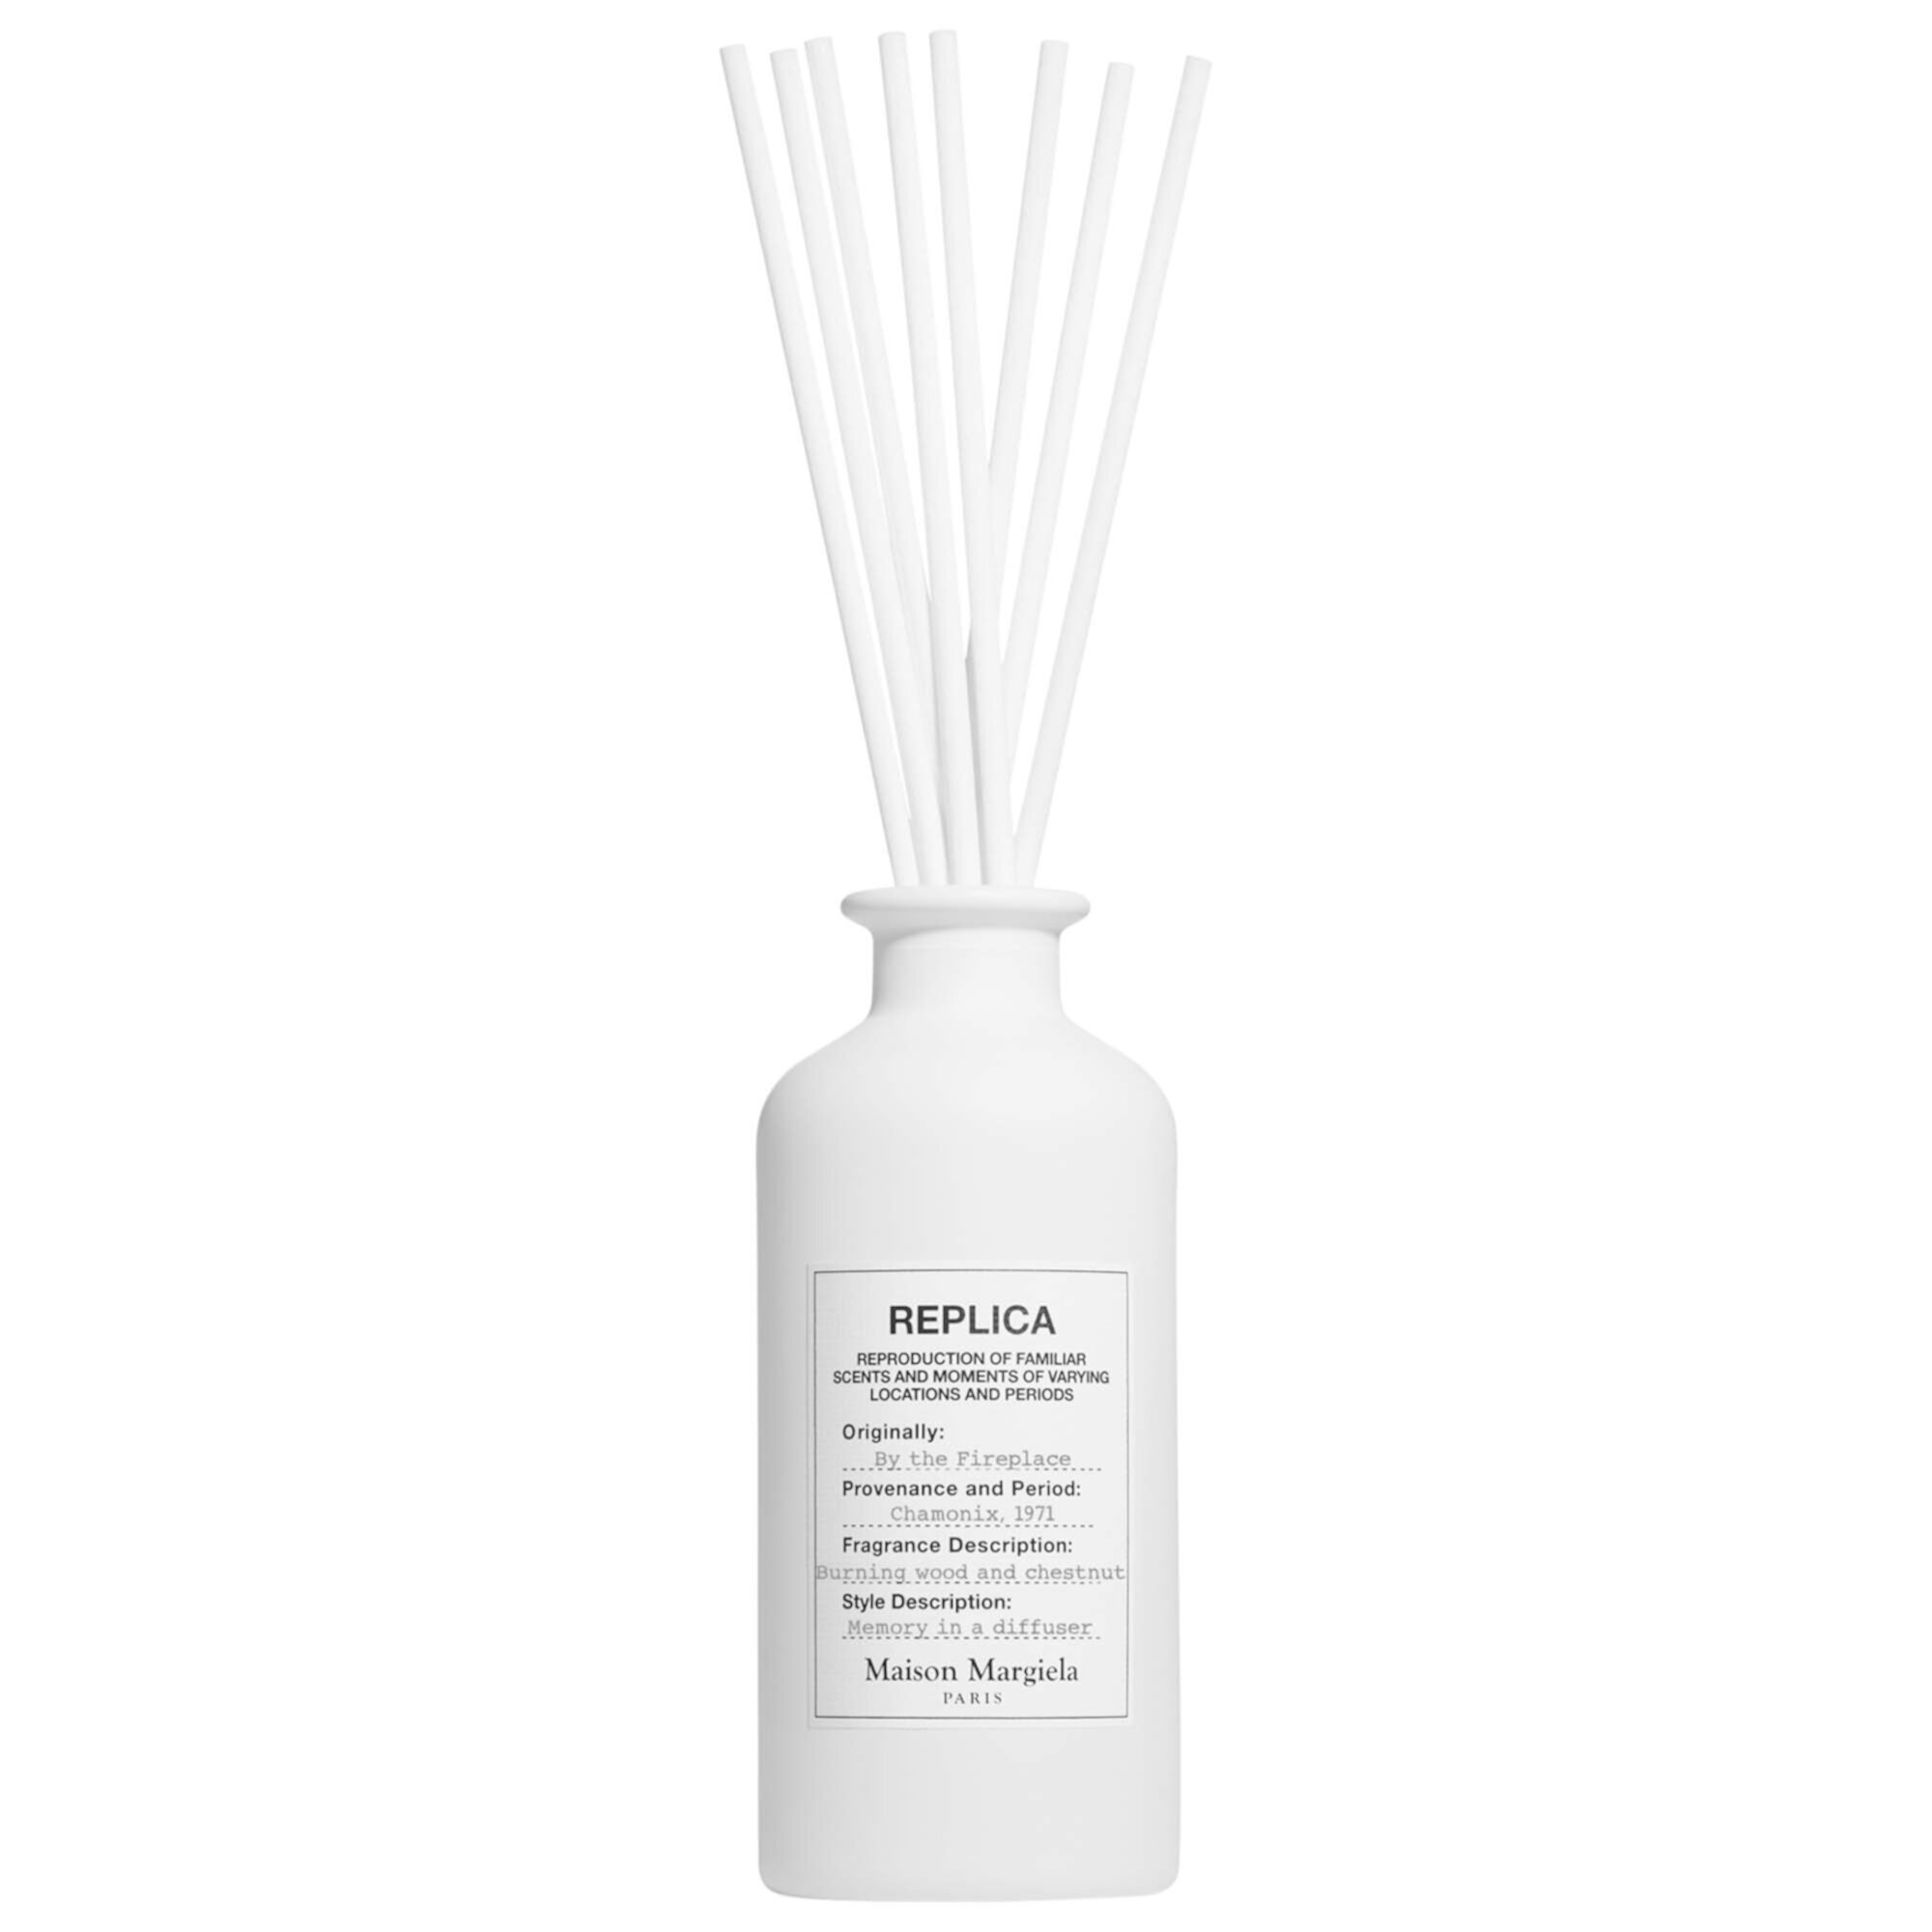 REPLICA' By The Fireplace Diffuser Maison Margiela